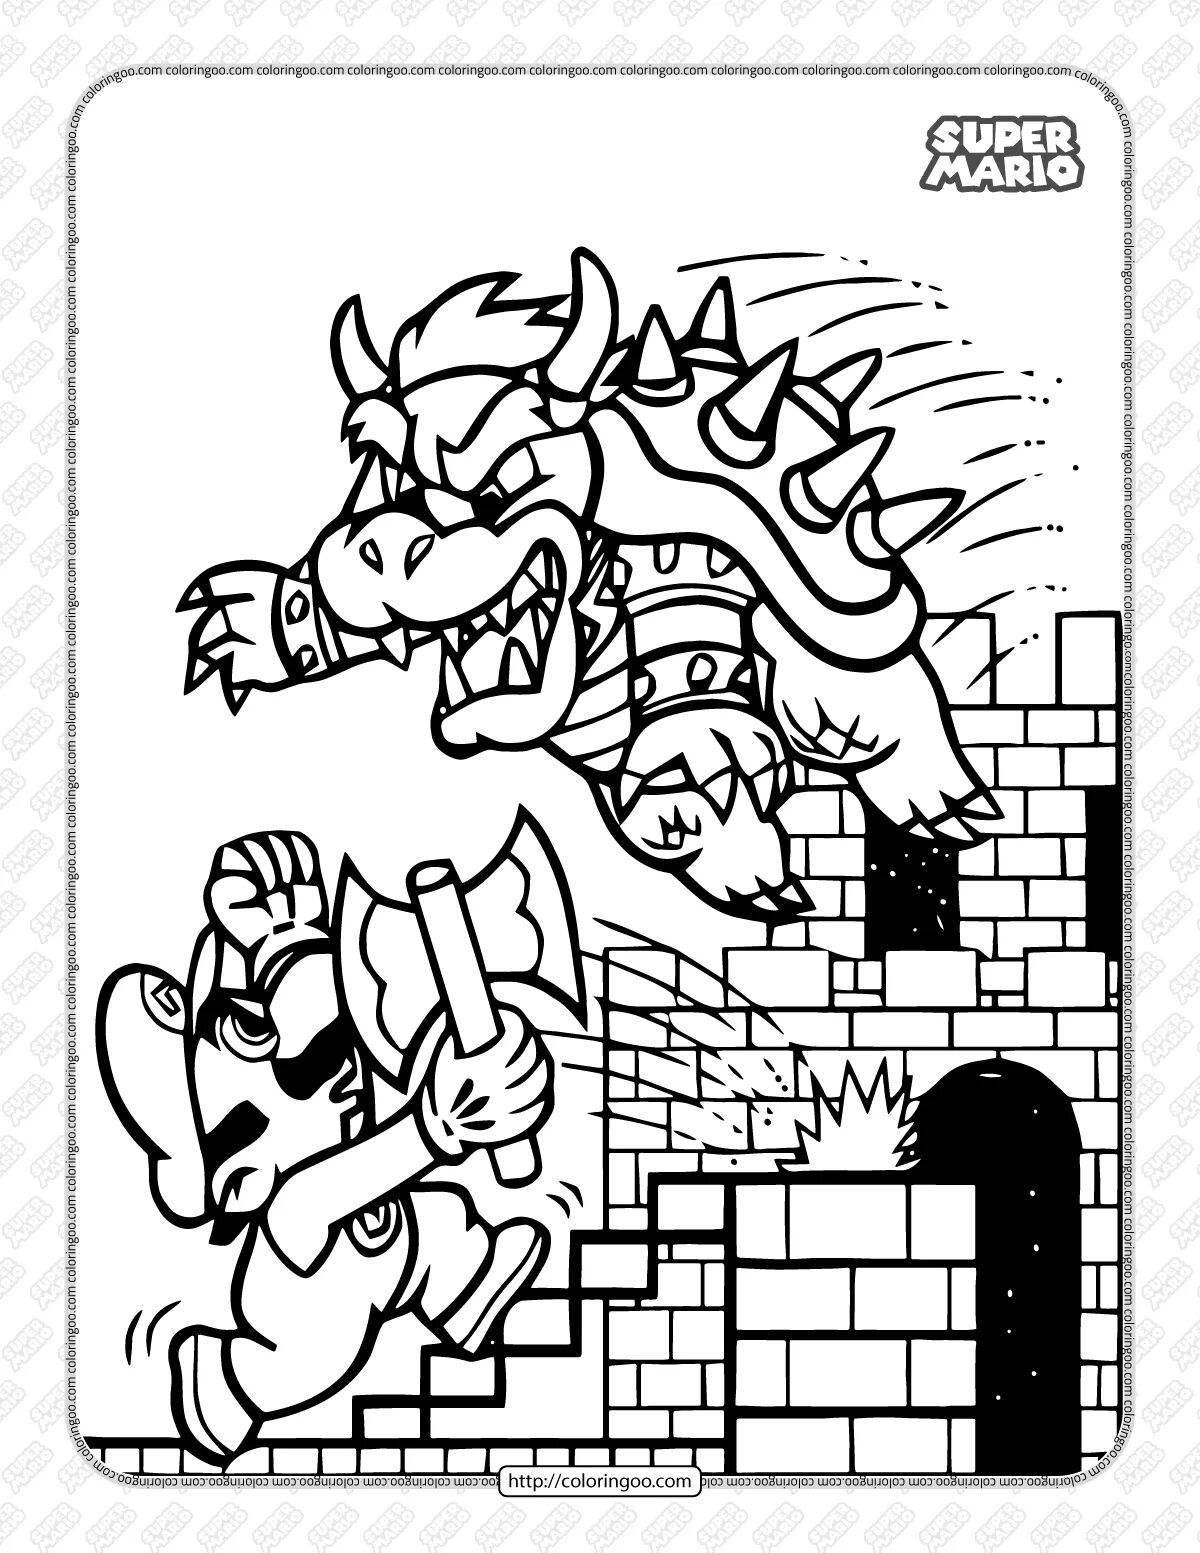 Color-frenzy coloring page popular games